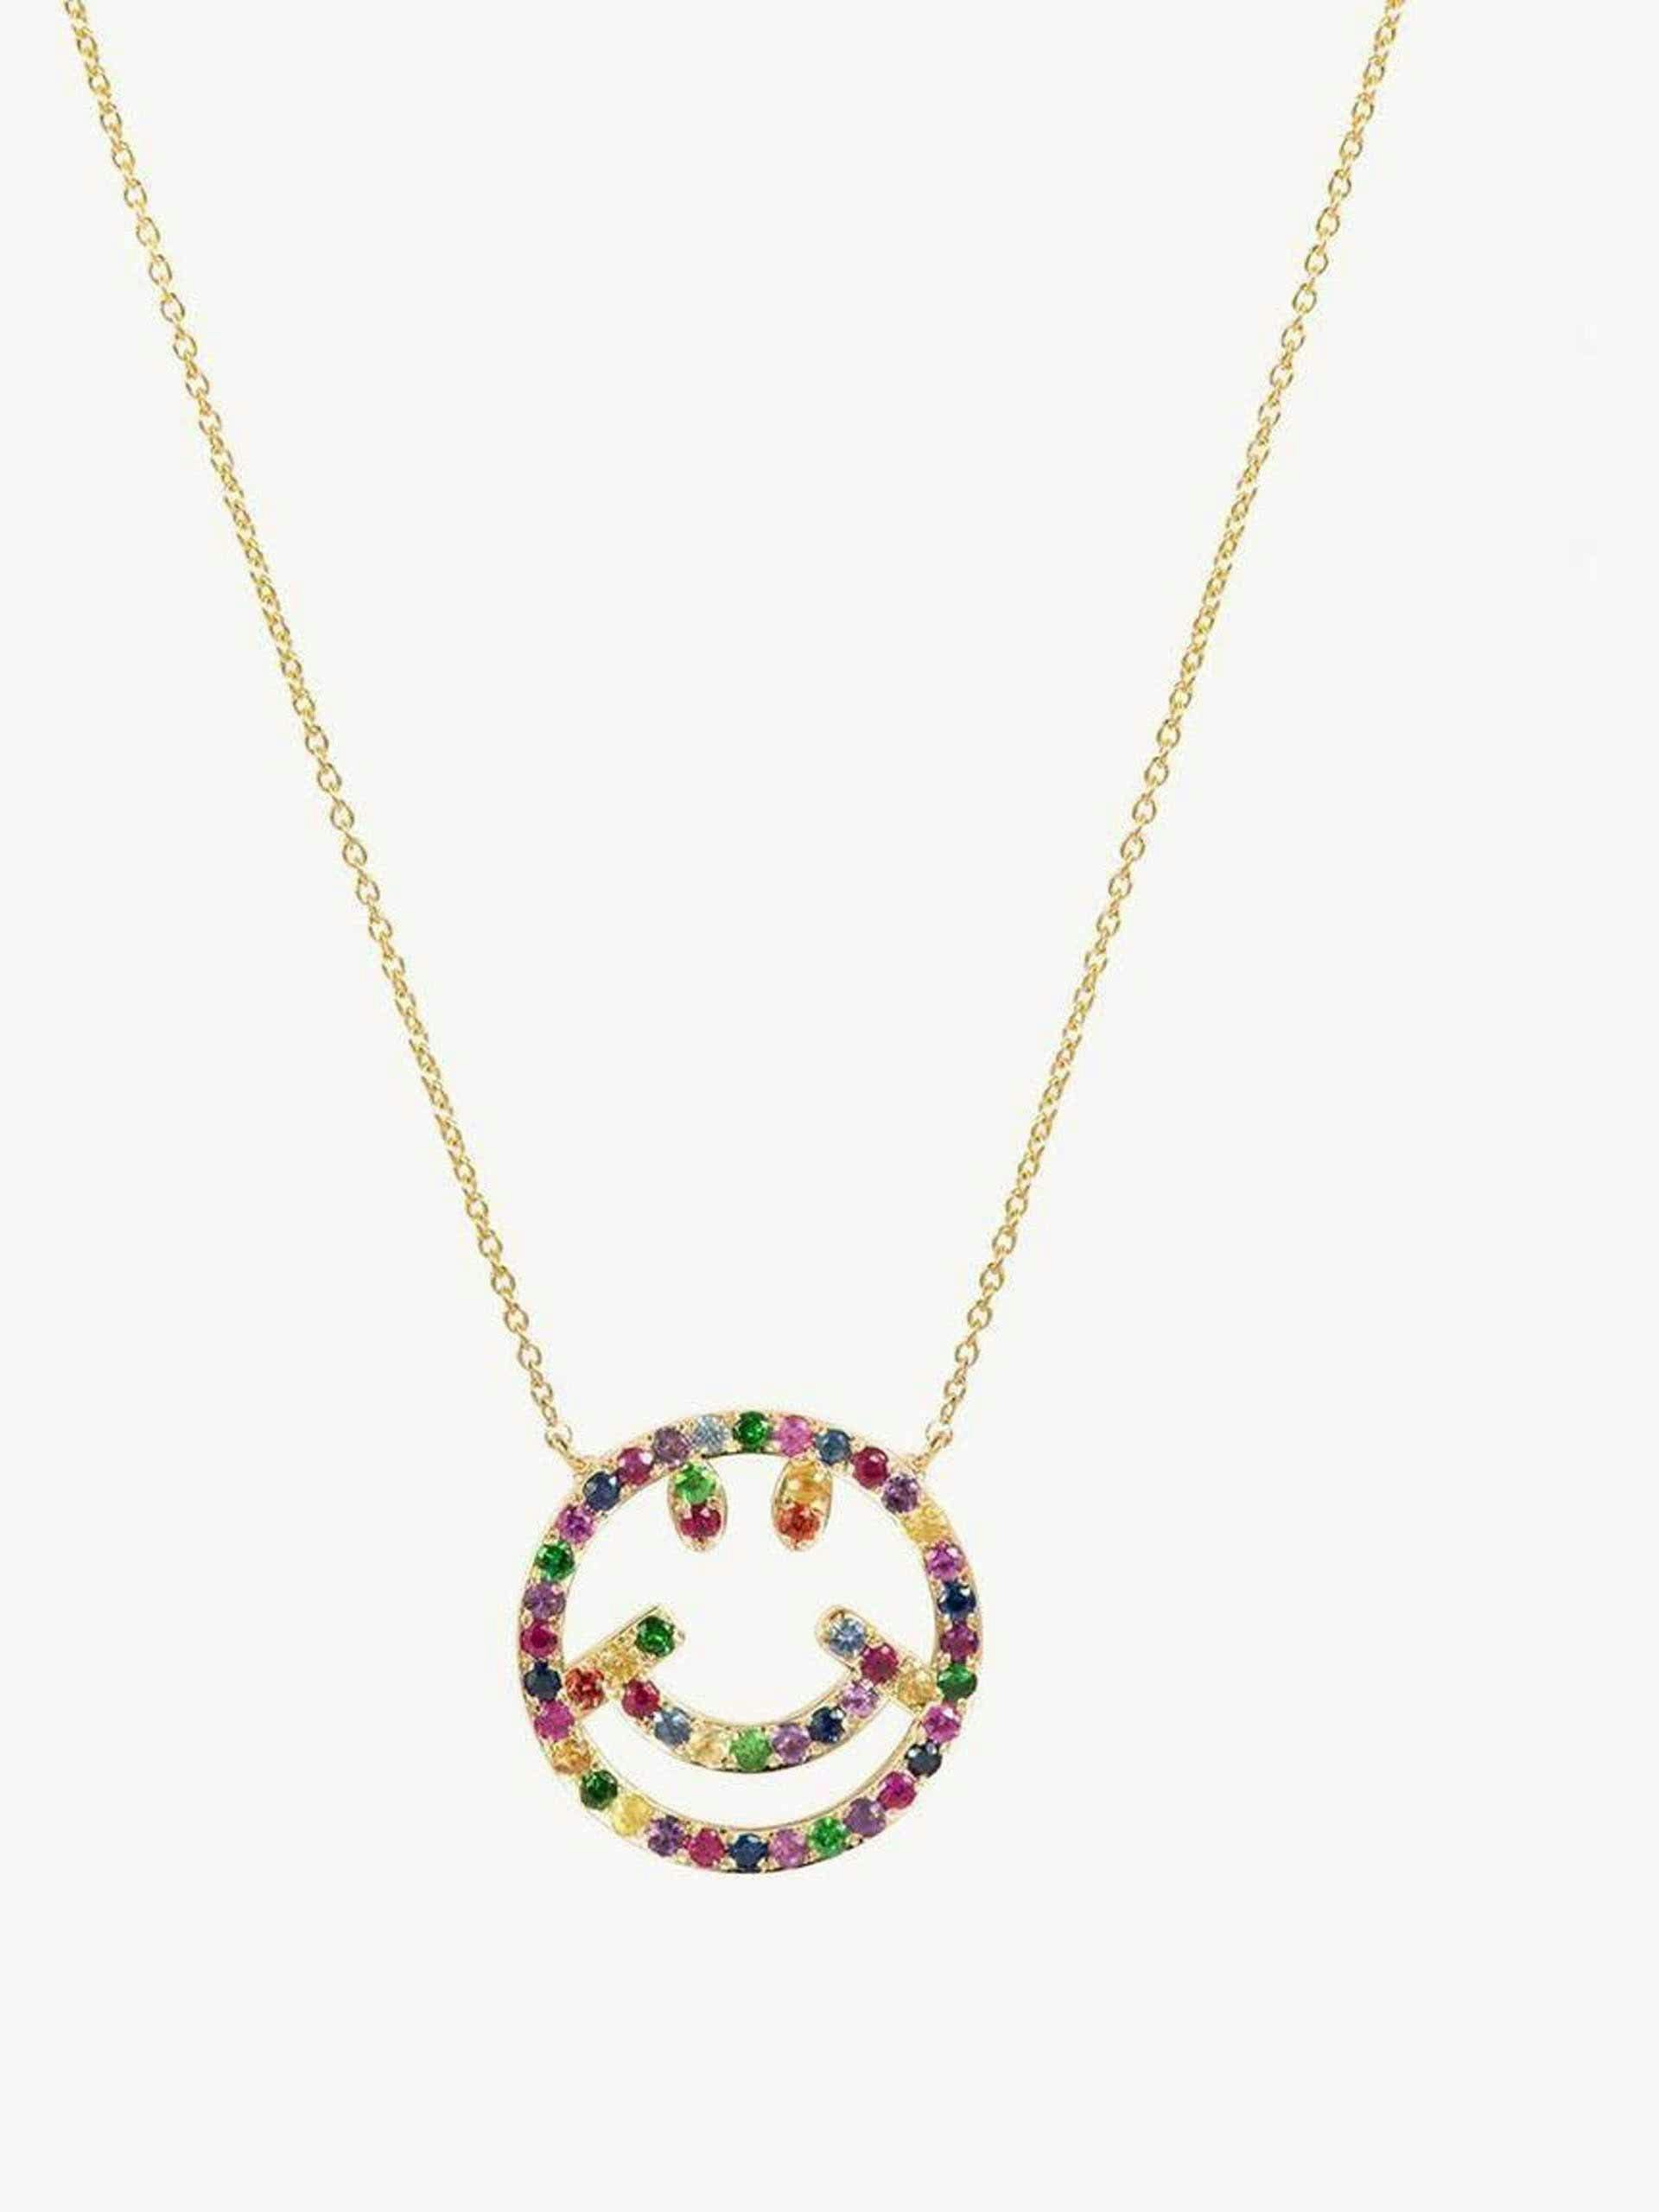 Rainbow sapphire 'Have A Nice Day' necklace